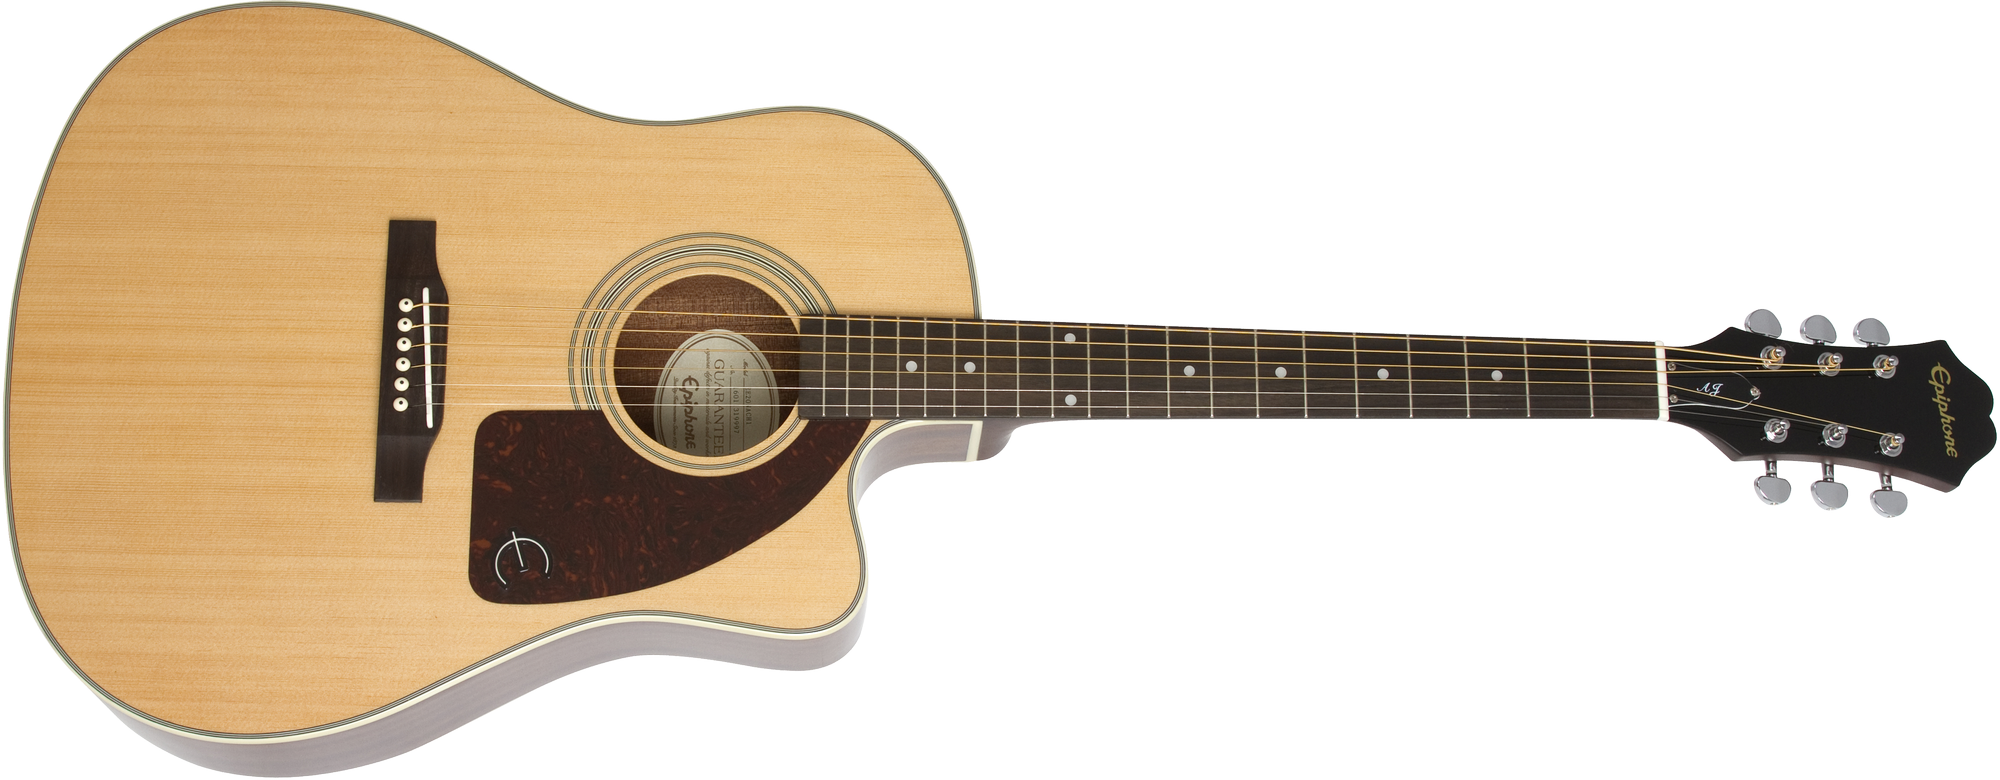 Epiphone AJ-210CE Outfit Western Guitar (Natural)